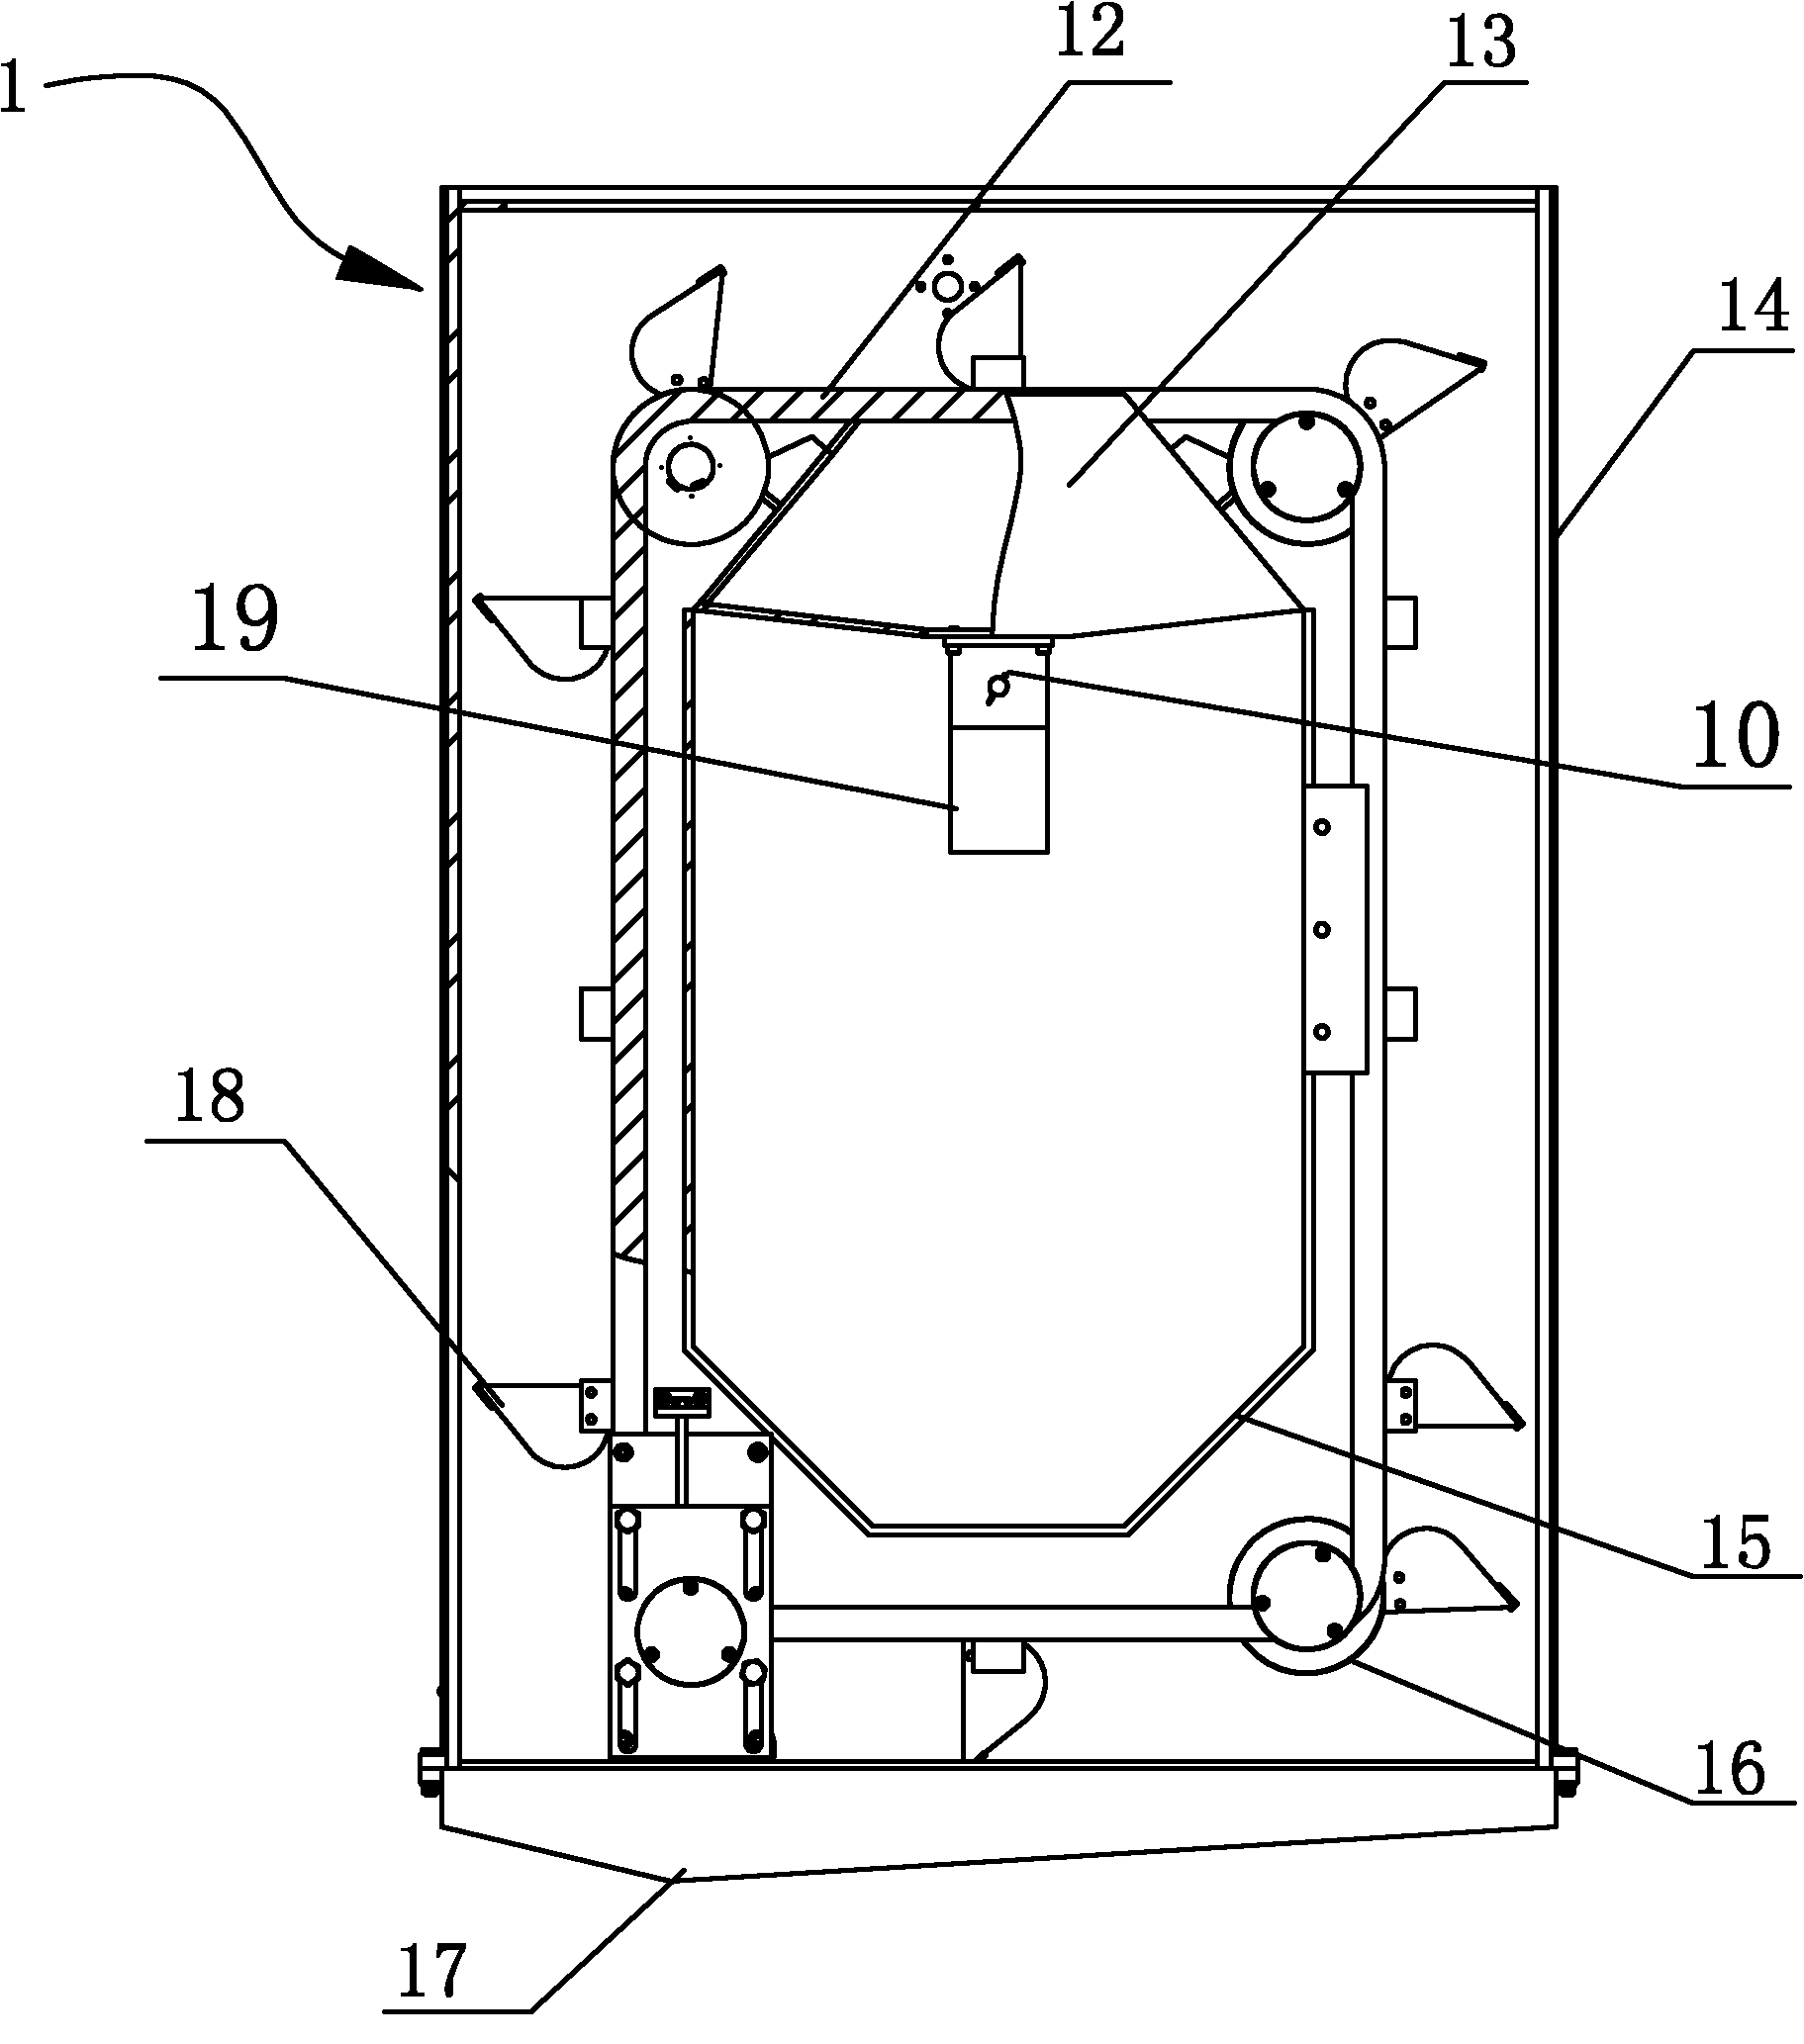 Small steel shot feeding circulator and numerical control metal surface treating machine using the same